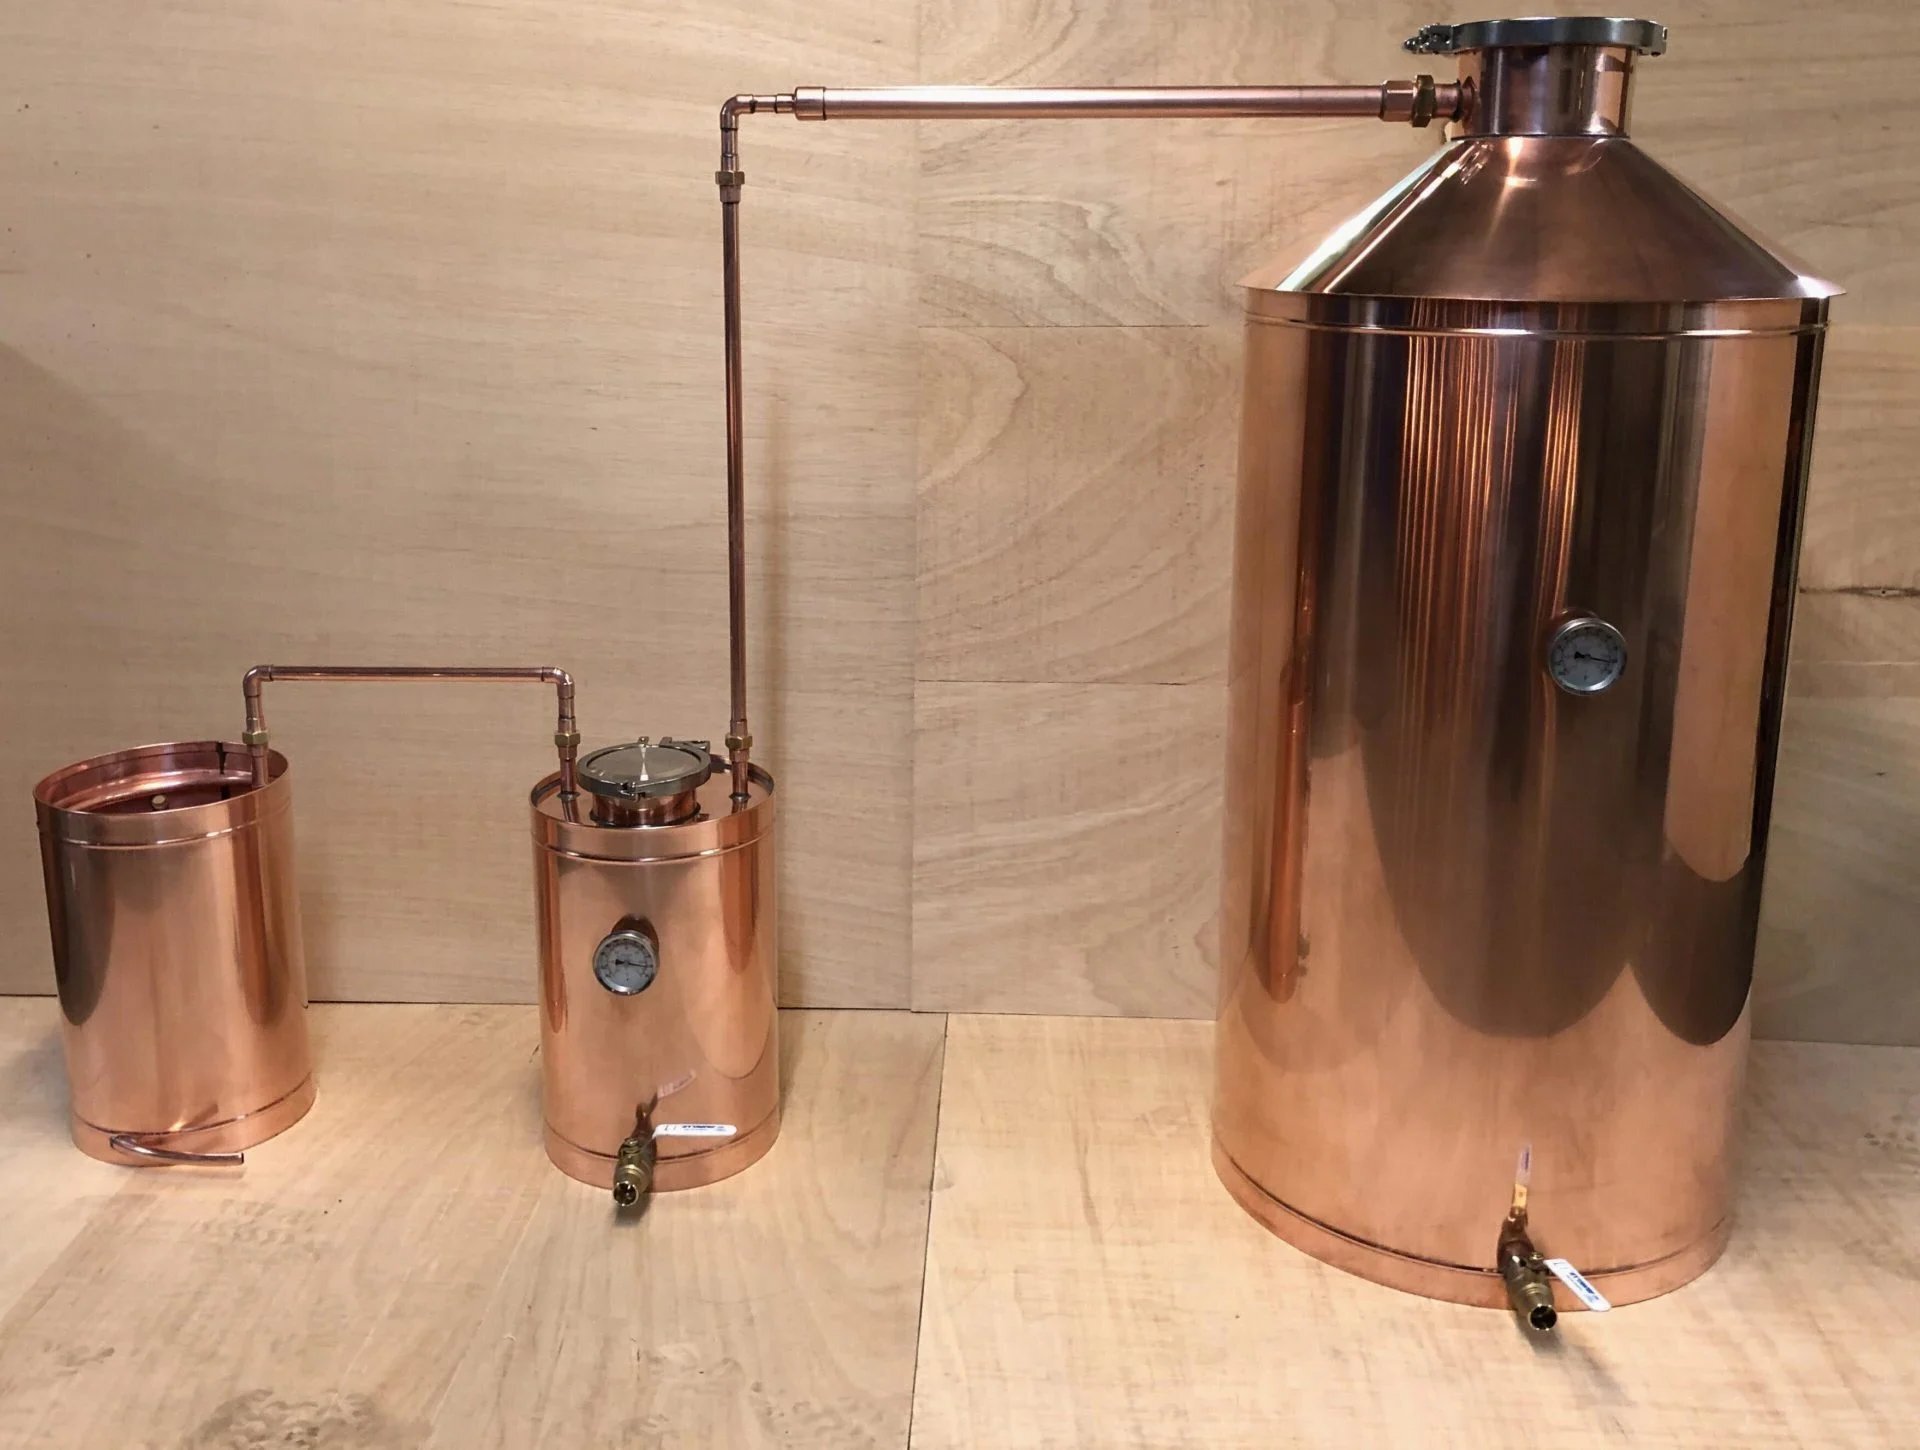 How To Make A Still For Moonshine